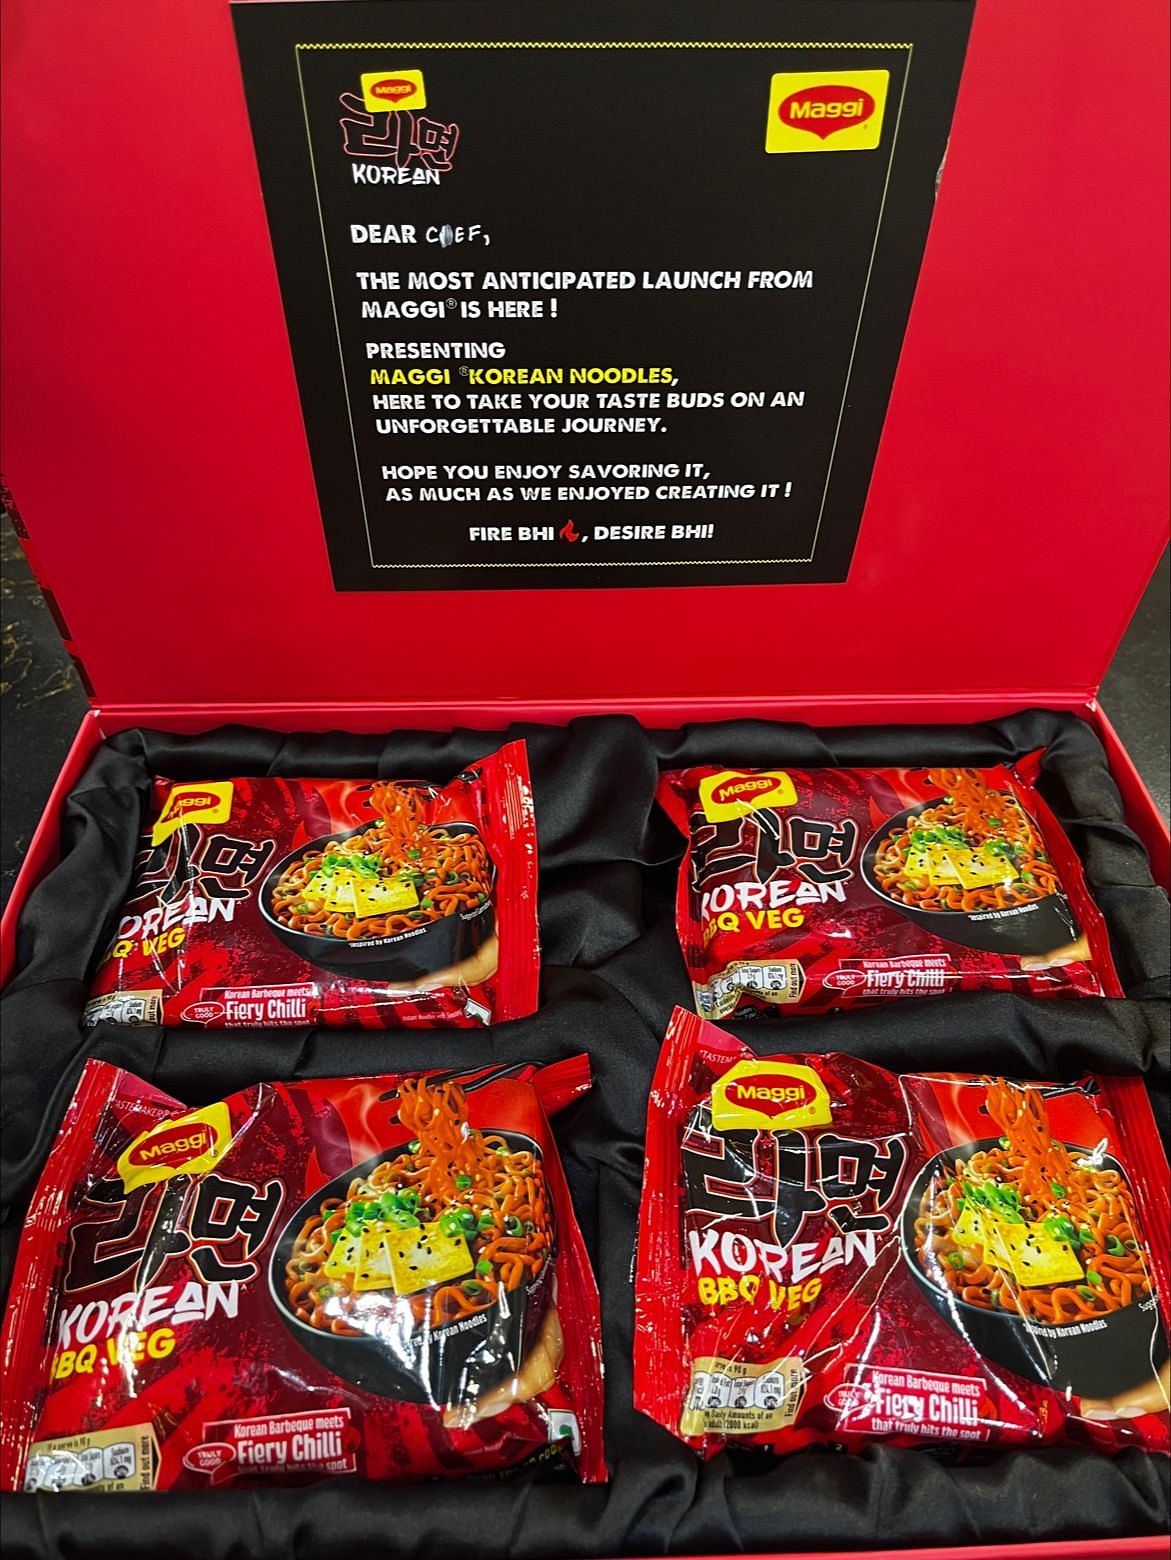 Nestle Maggi launches barbeque-flavoured Korean noodles